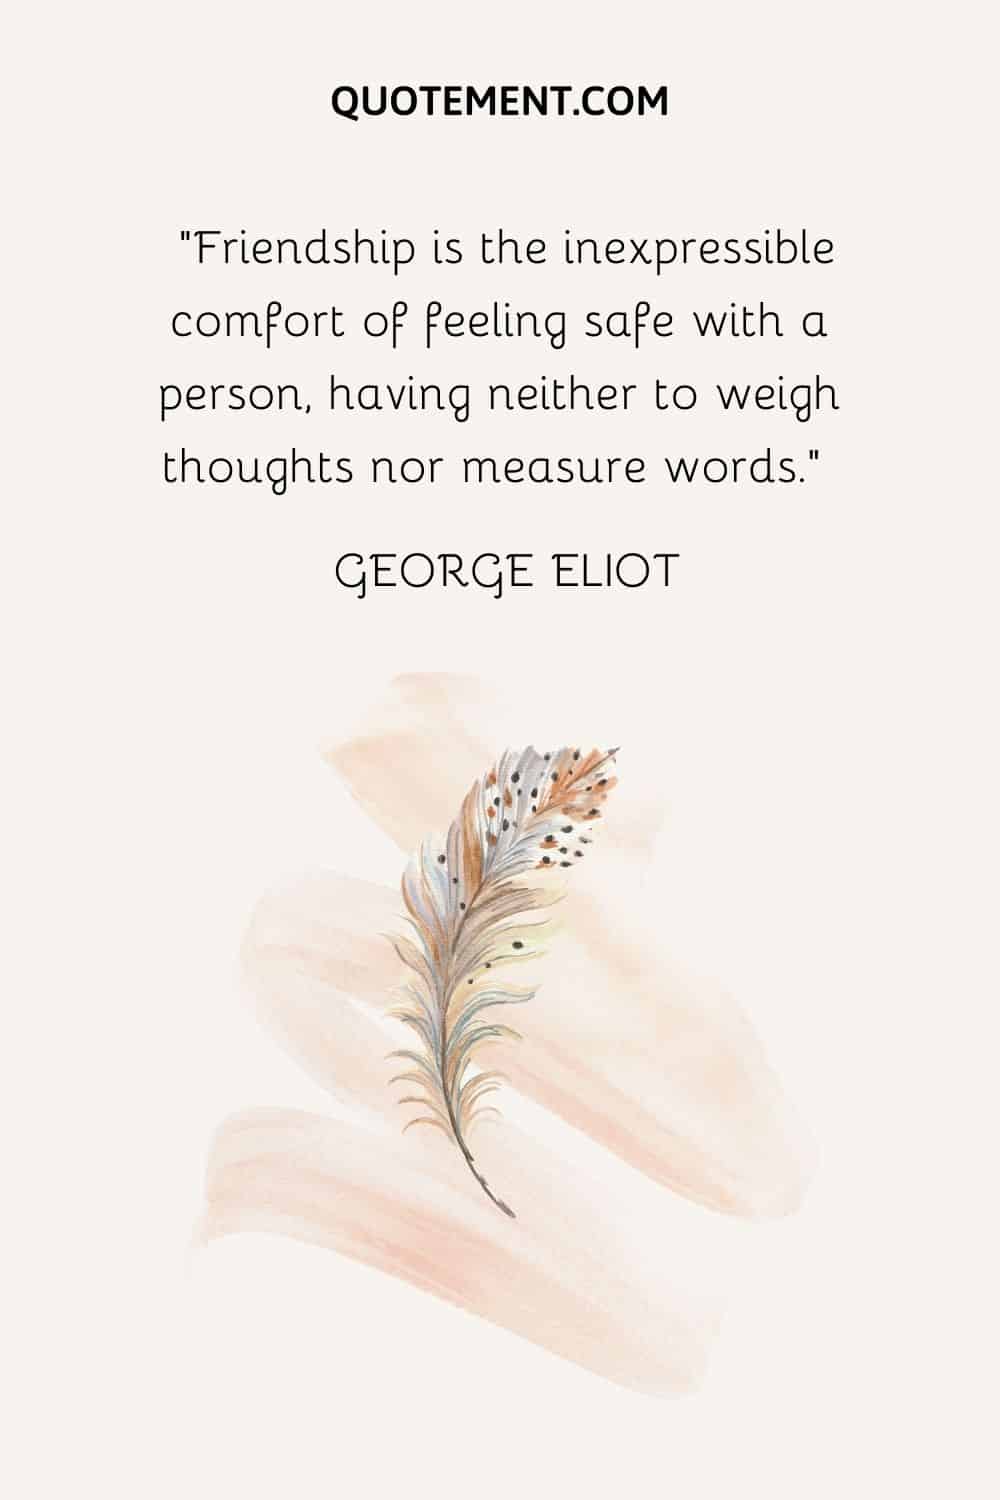 Friendship is the inexpressible comfort of feeling safe with a person, having neither to weigh thoughts nor measure words. — George Eliot